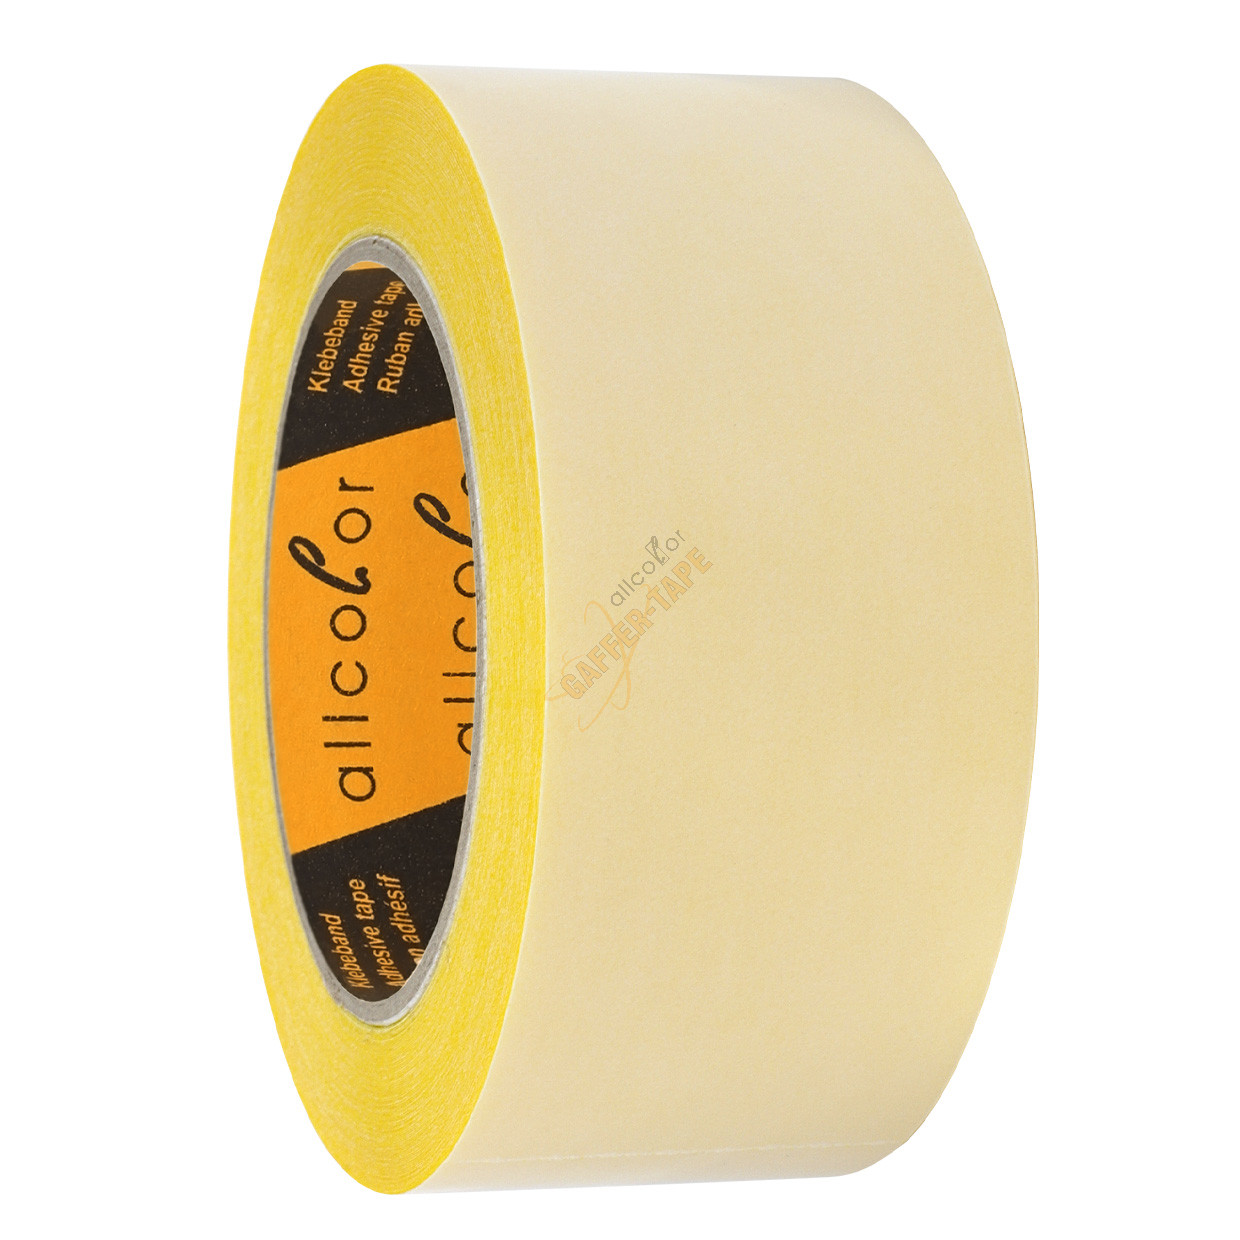 Exhibition-Tape foil, Double sided adhesive